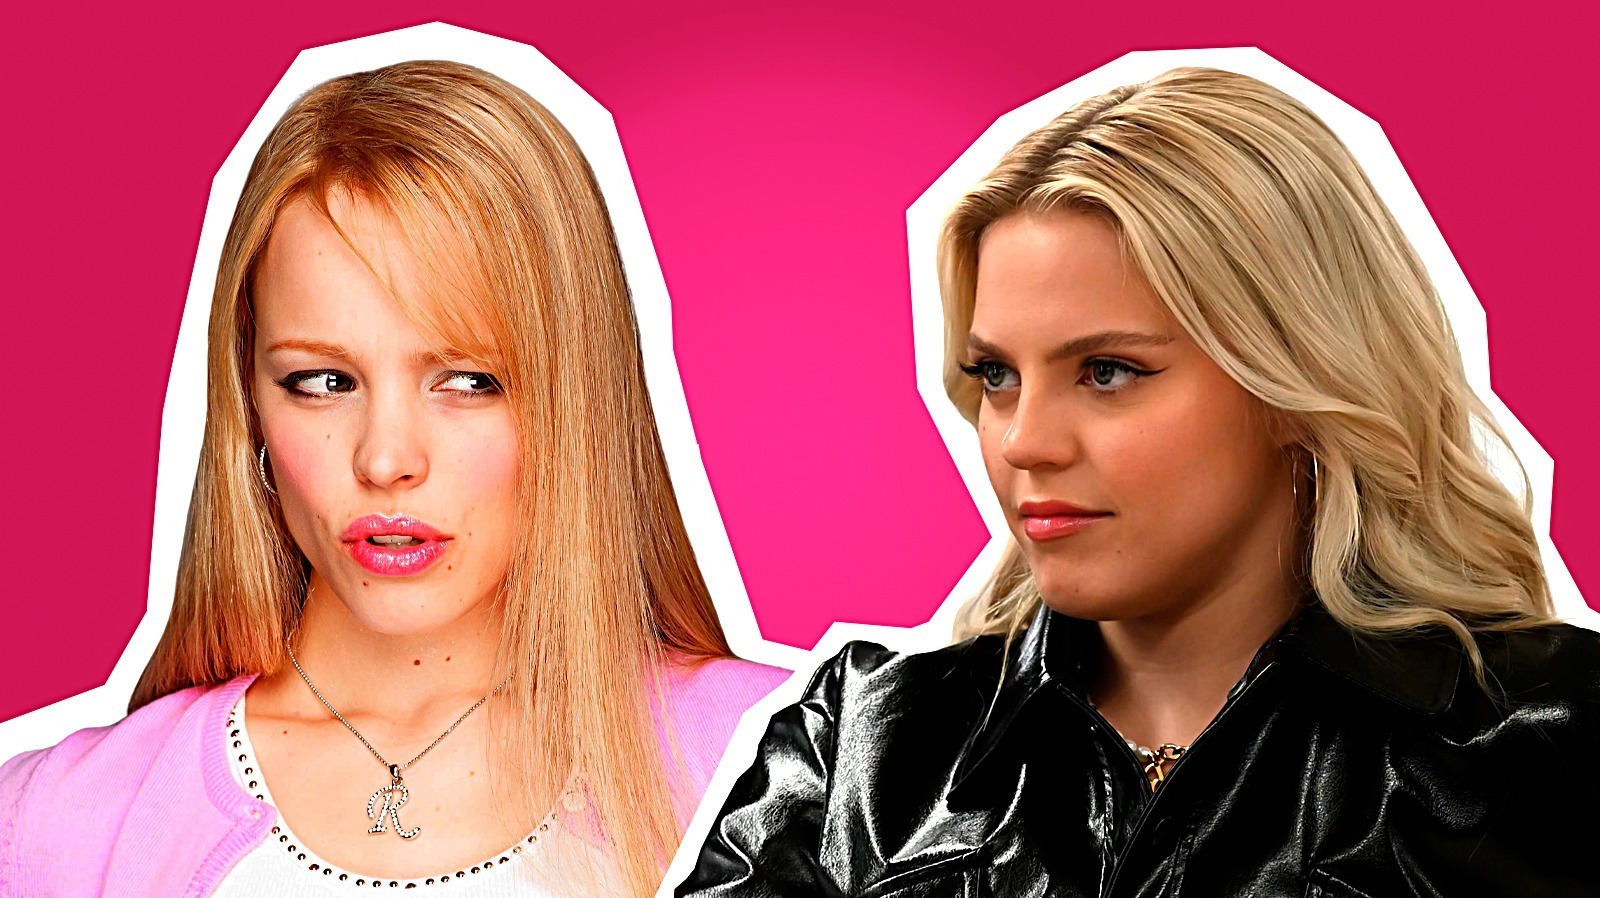 Why We're Worried About The Mean Girls Remake